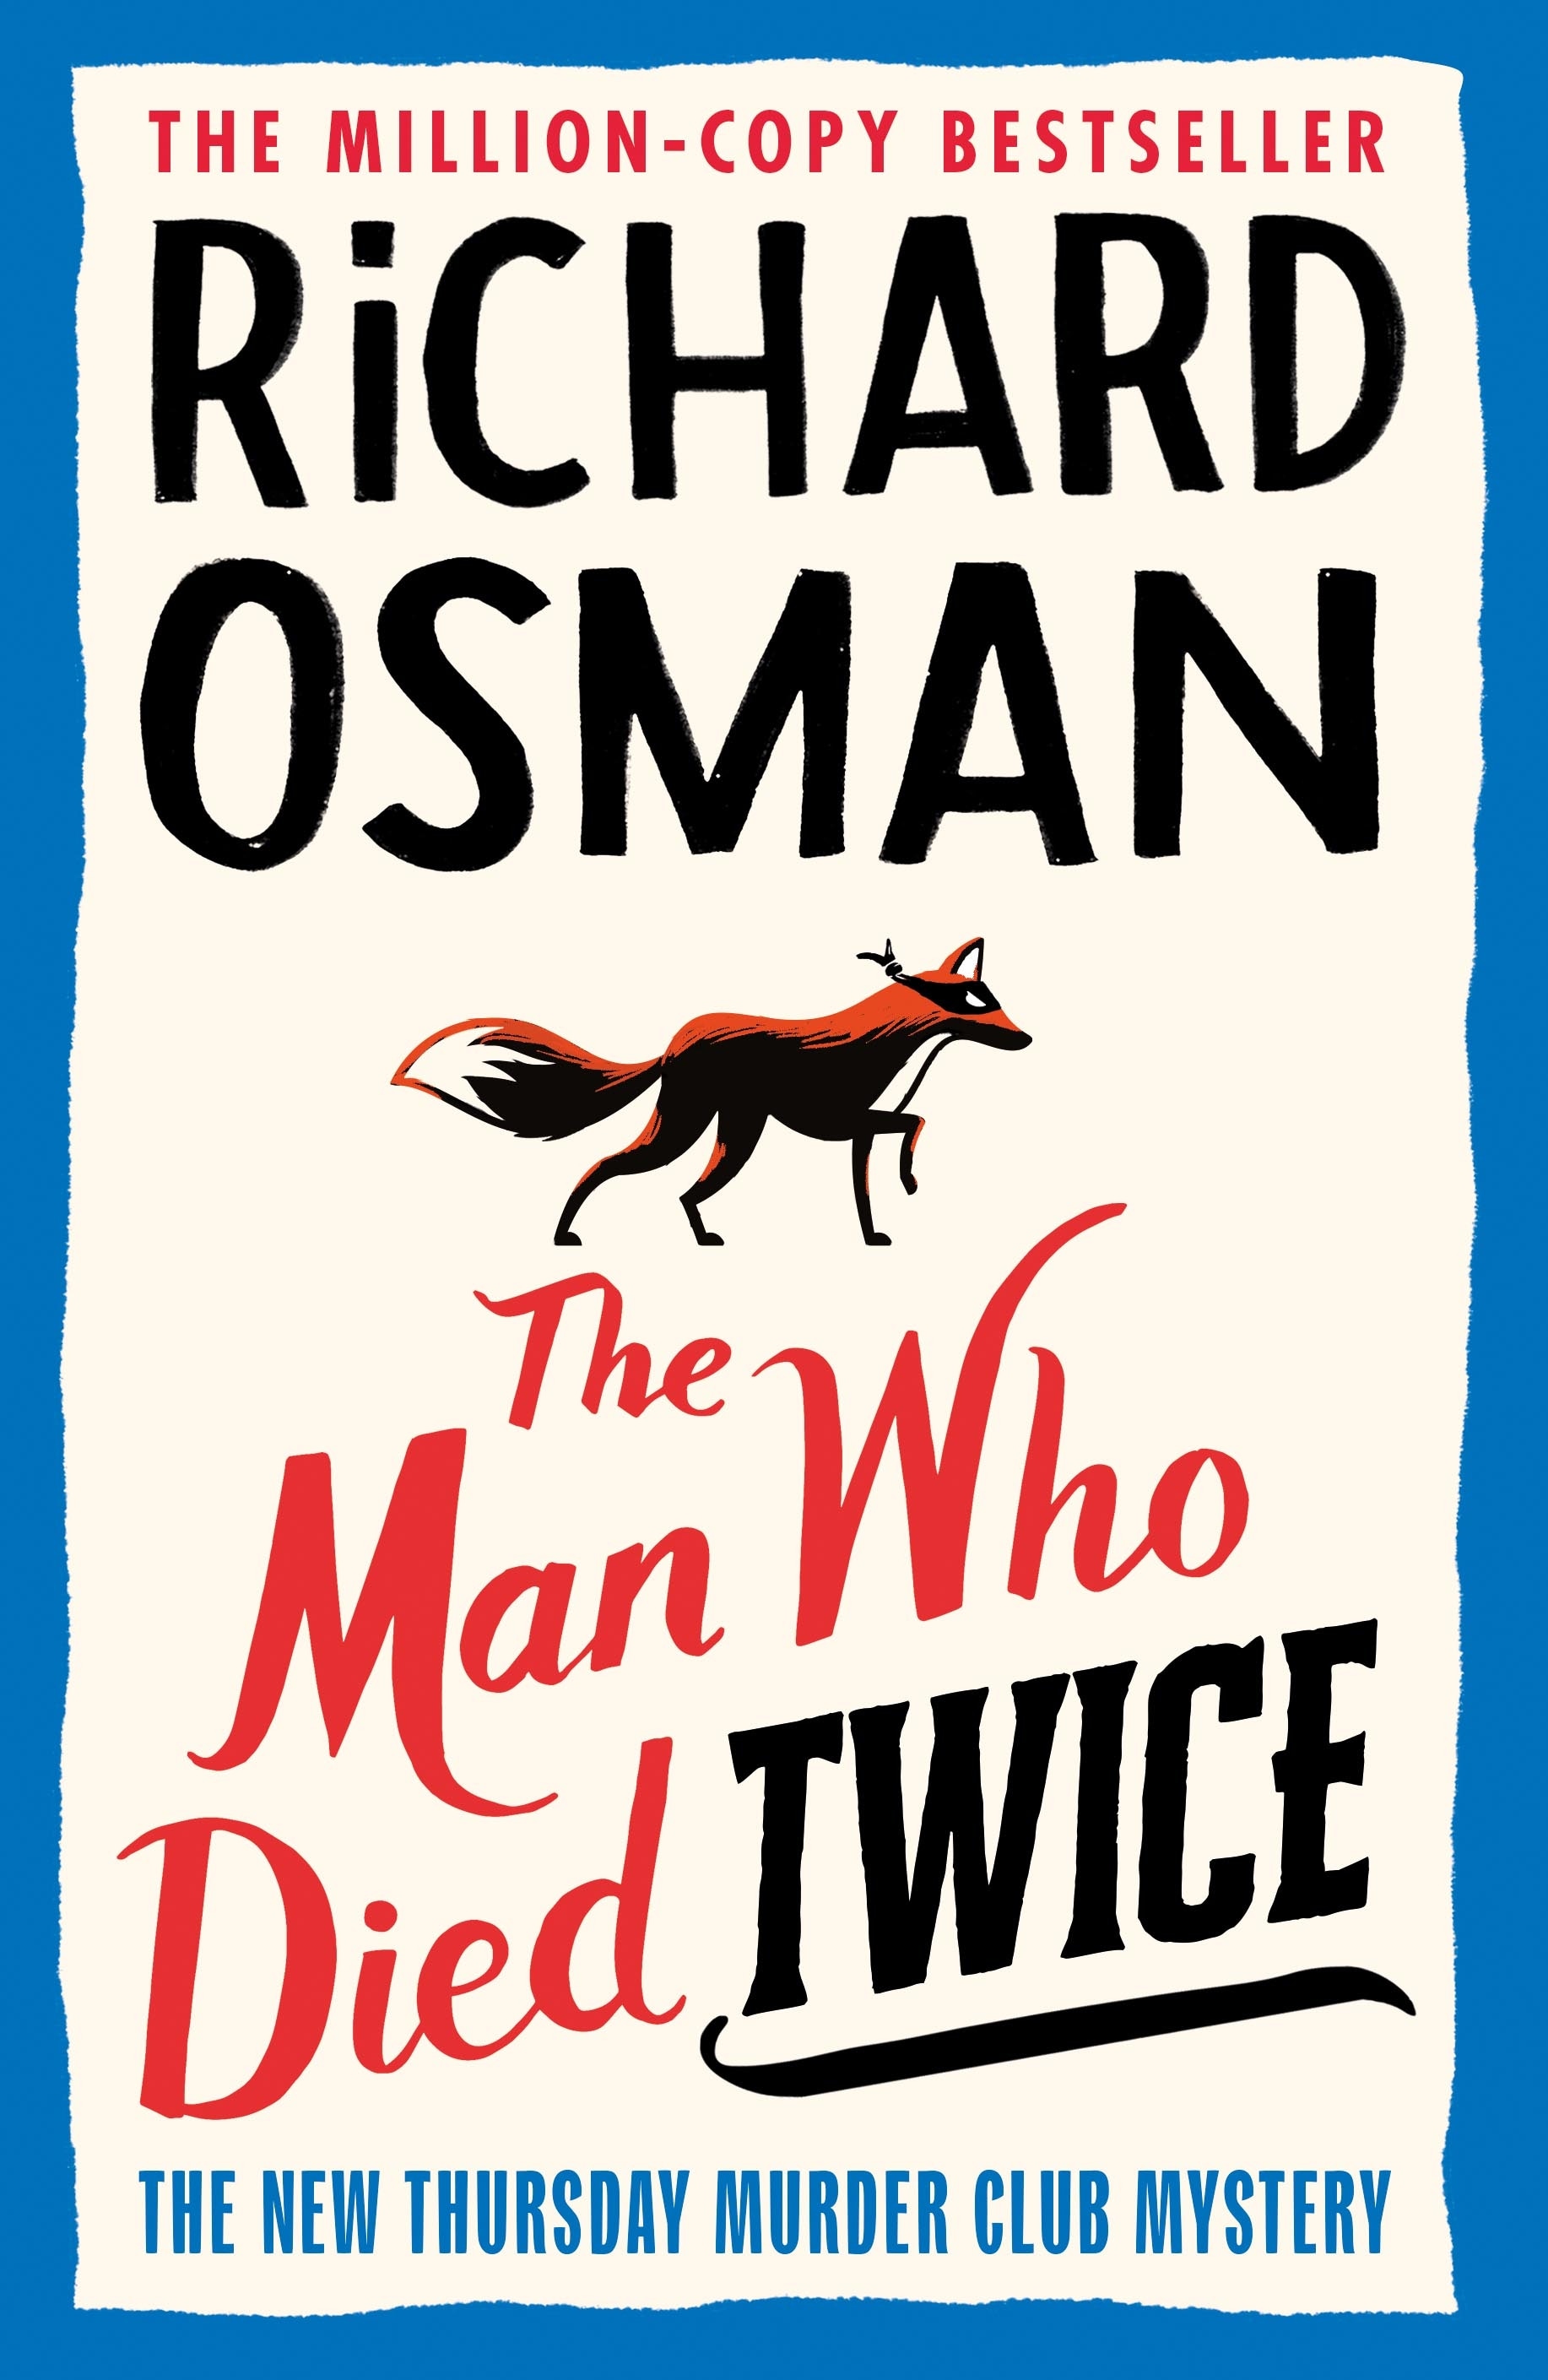 Book “The Man Who Died Twice” by Richard Osman — September 16, 2021